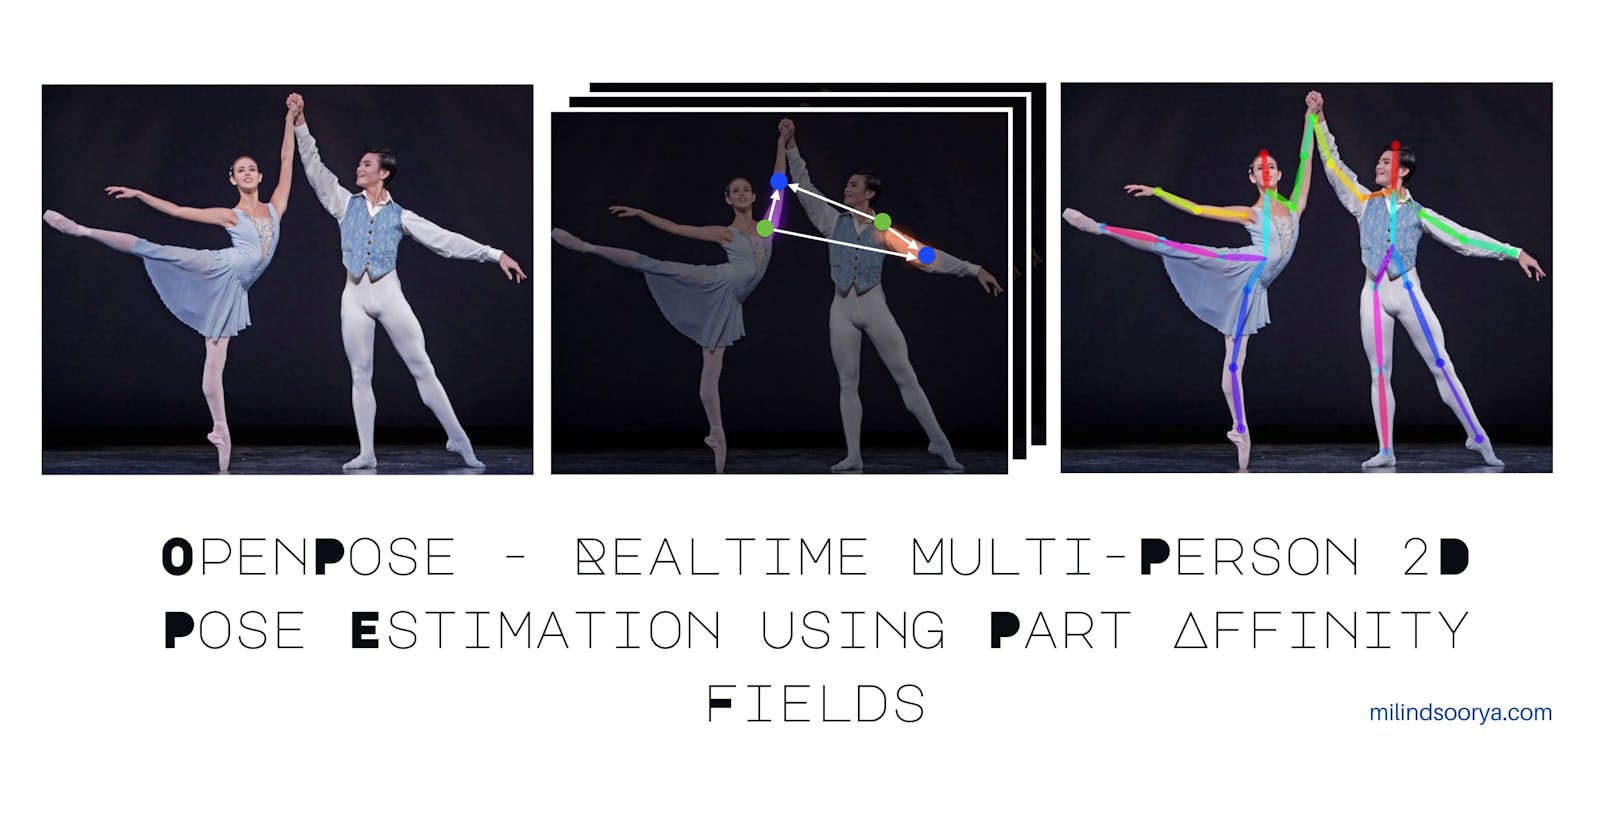 Critical Review on “OpenPose - Realtime Multi-Person 2D Pose Estimation using Part Affinity Fields”